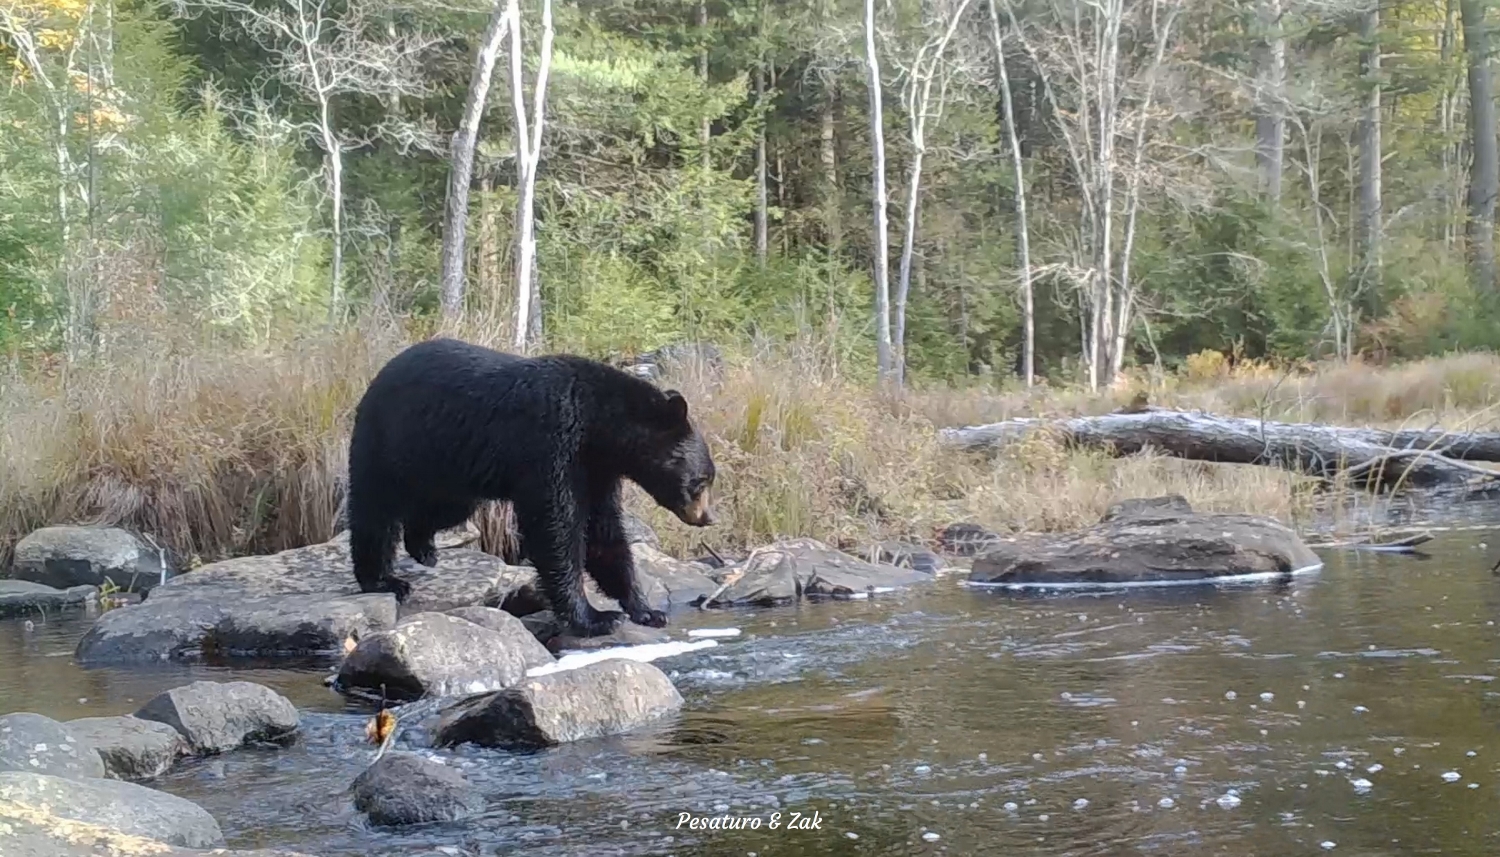 Trail Camera Placement at Stream Mouth Crossing captured a bear